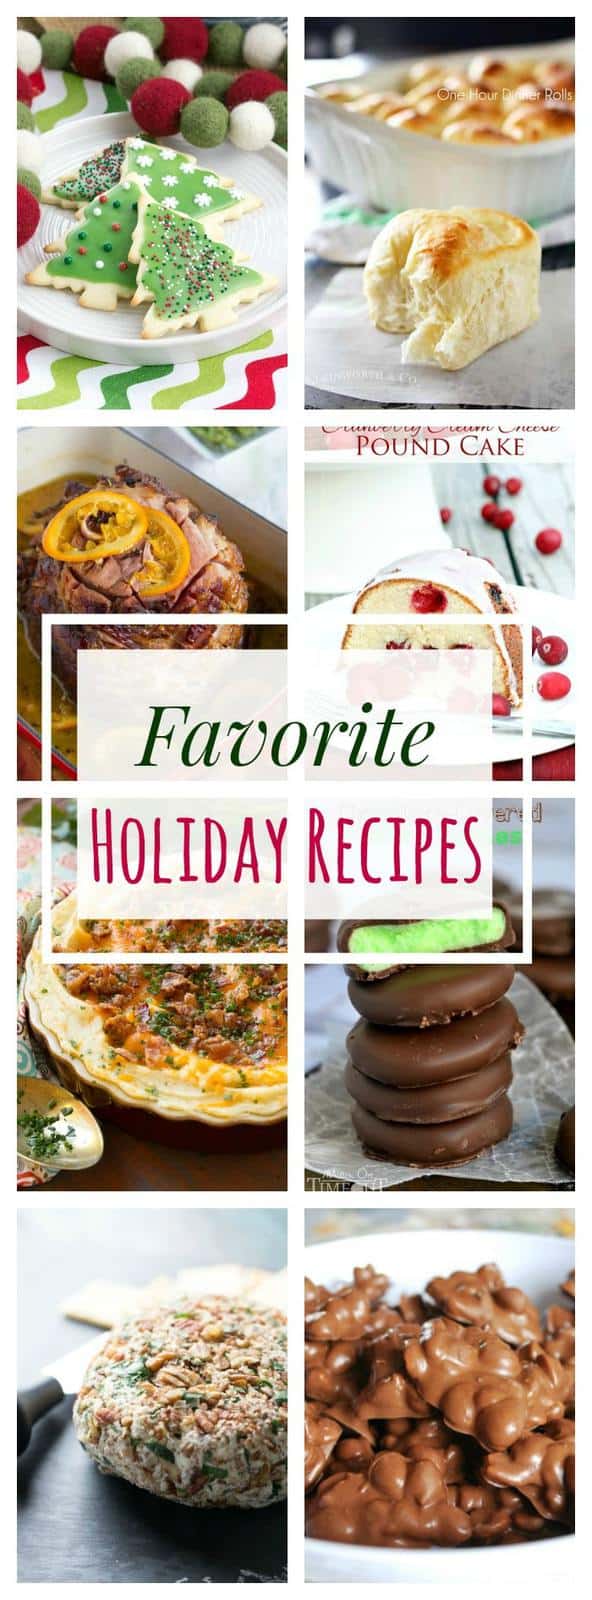 Favorite Holiday Recipes - cookies, candy, hams, roasts, sides, appetizers, and everything for Christmas and beyond